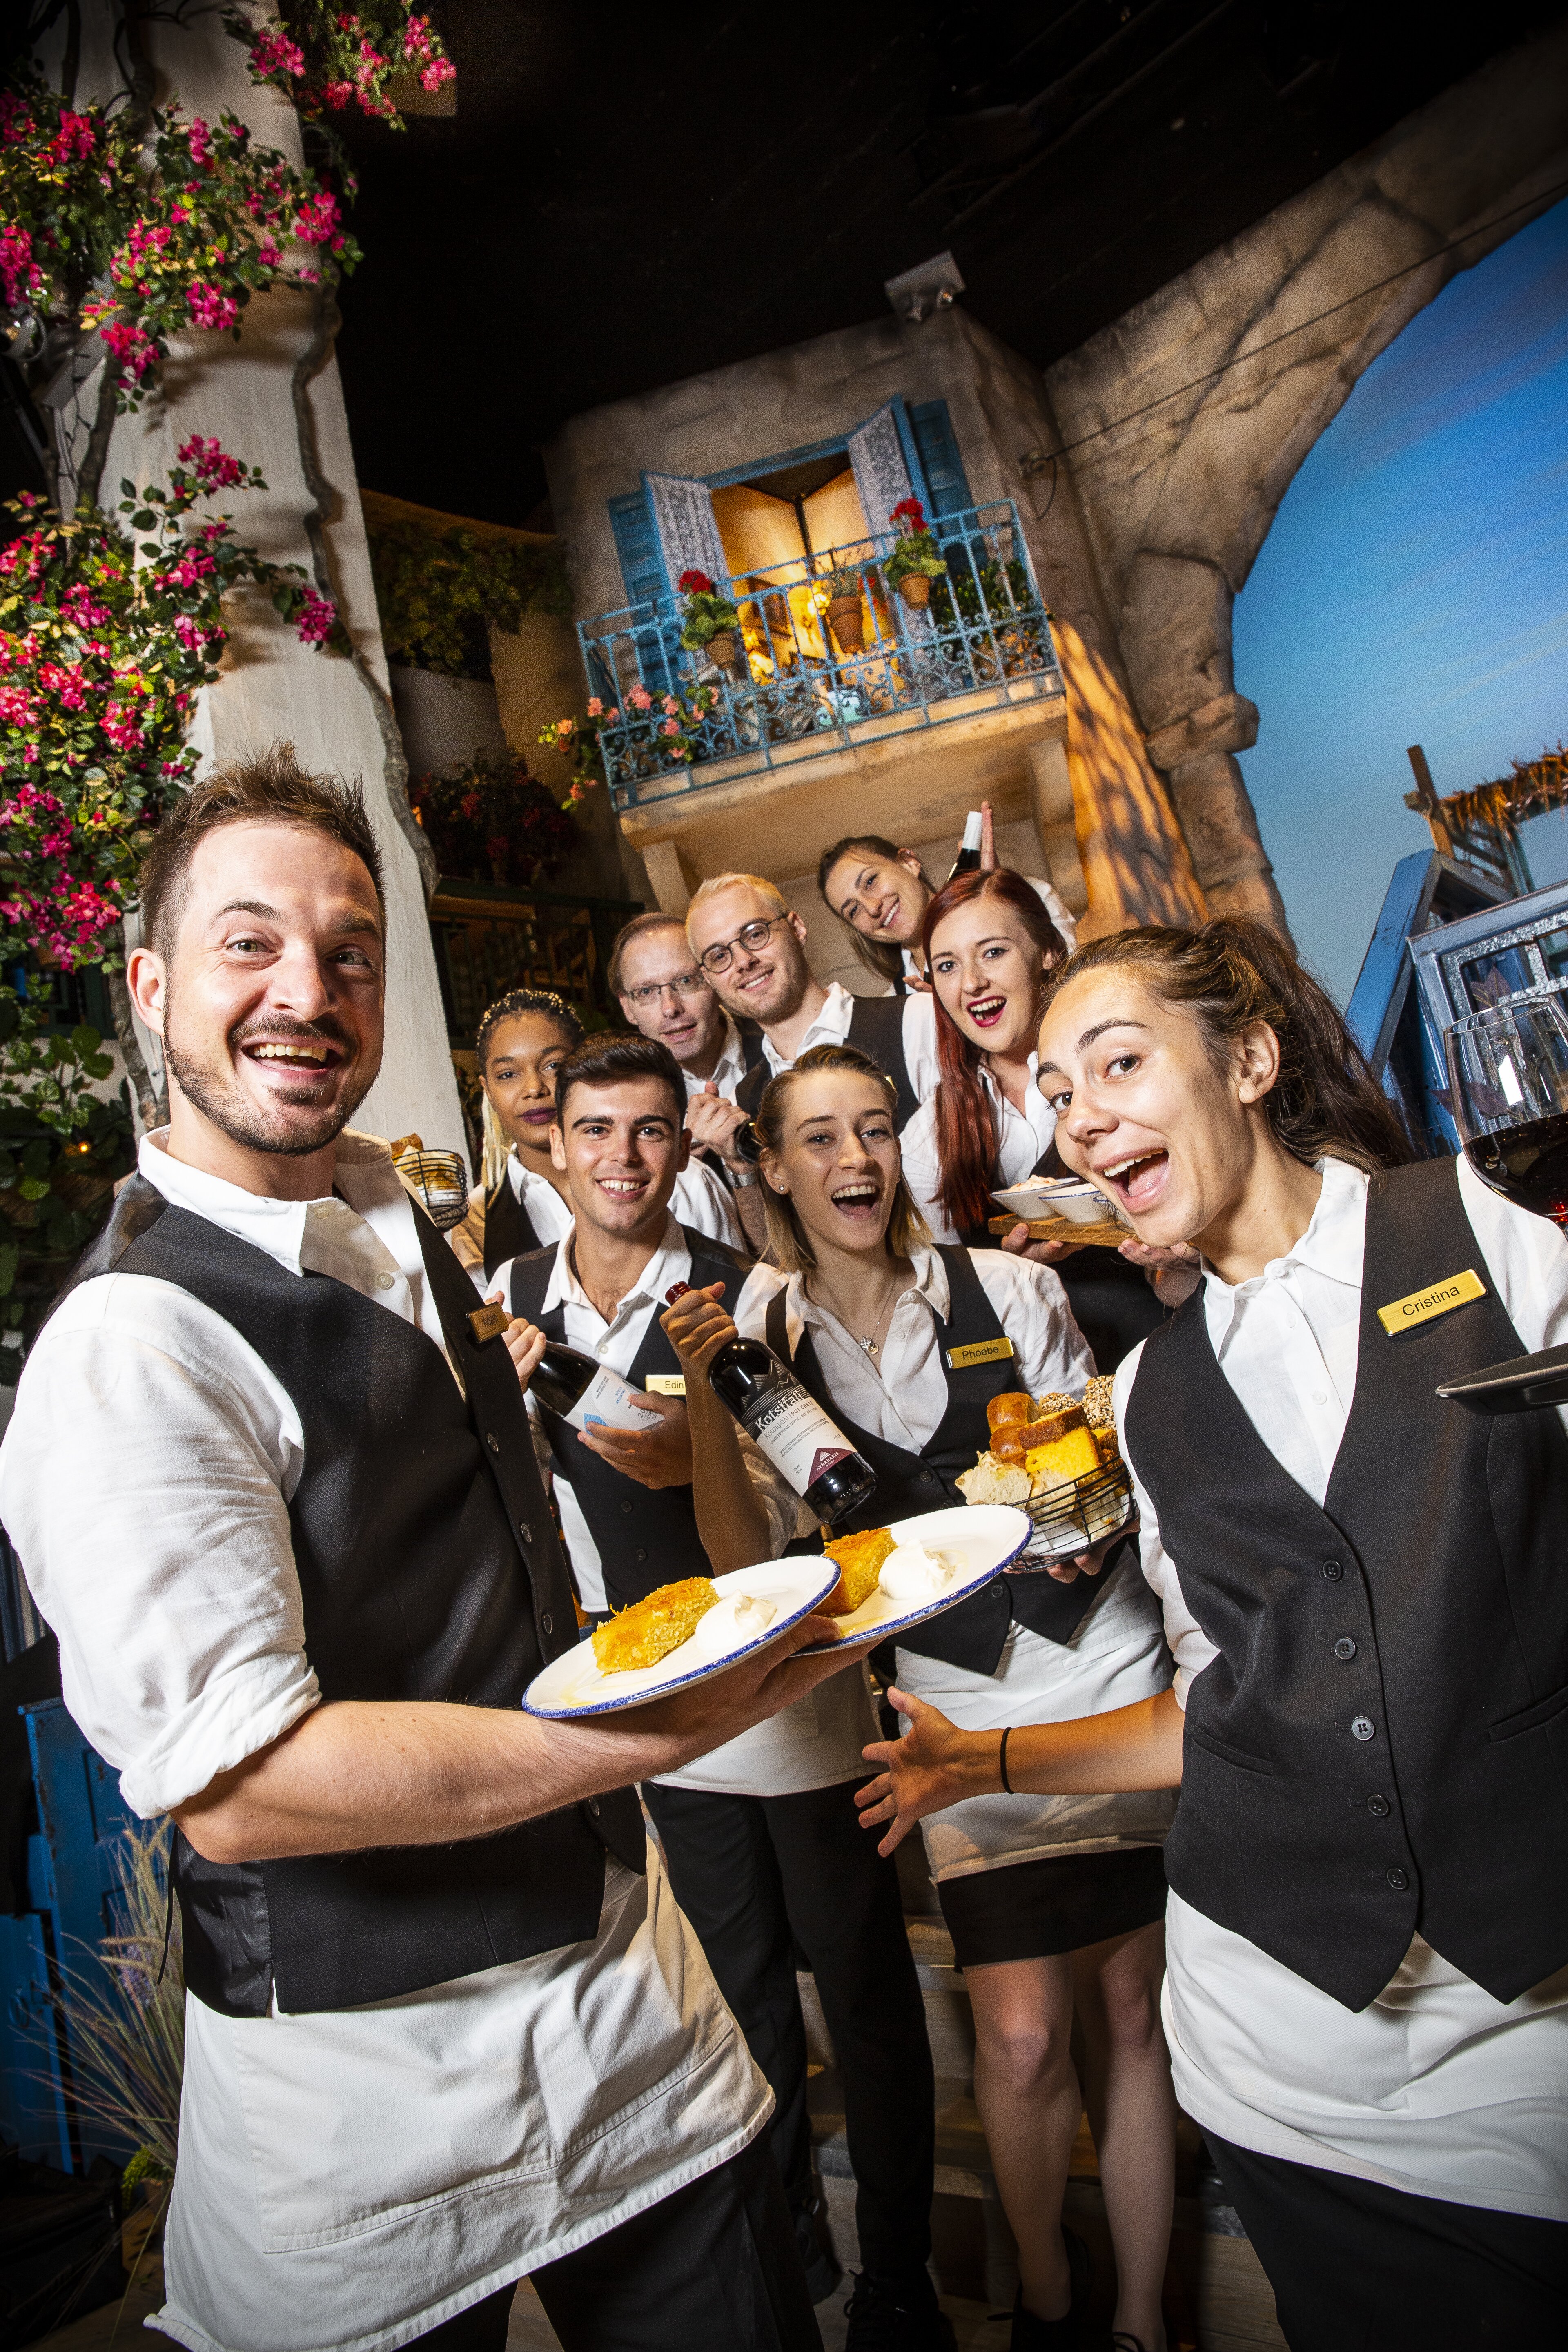 Super troupers: Rhubarb catering staff take to the floor at Mamma Mia! The Party